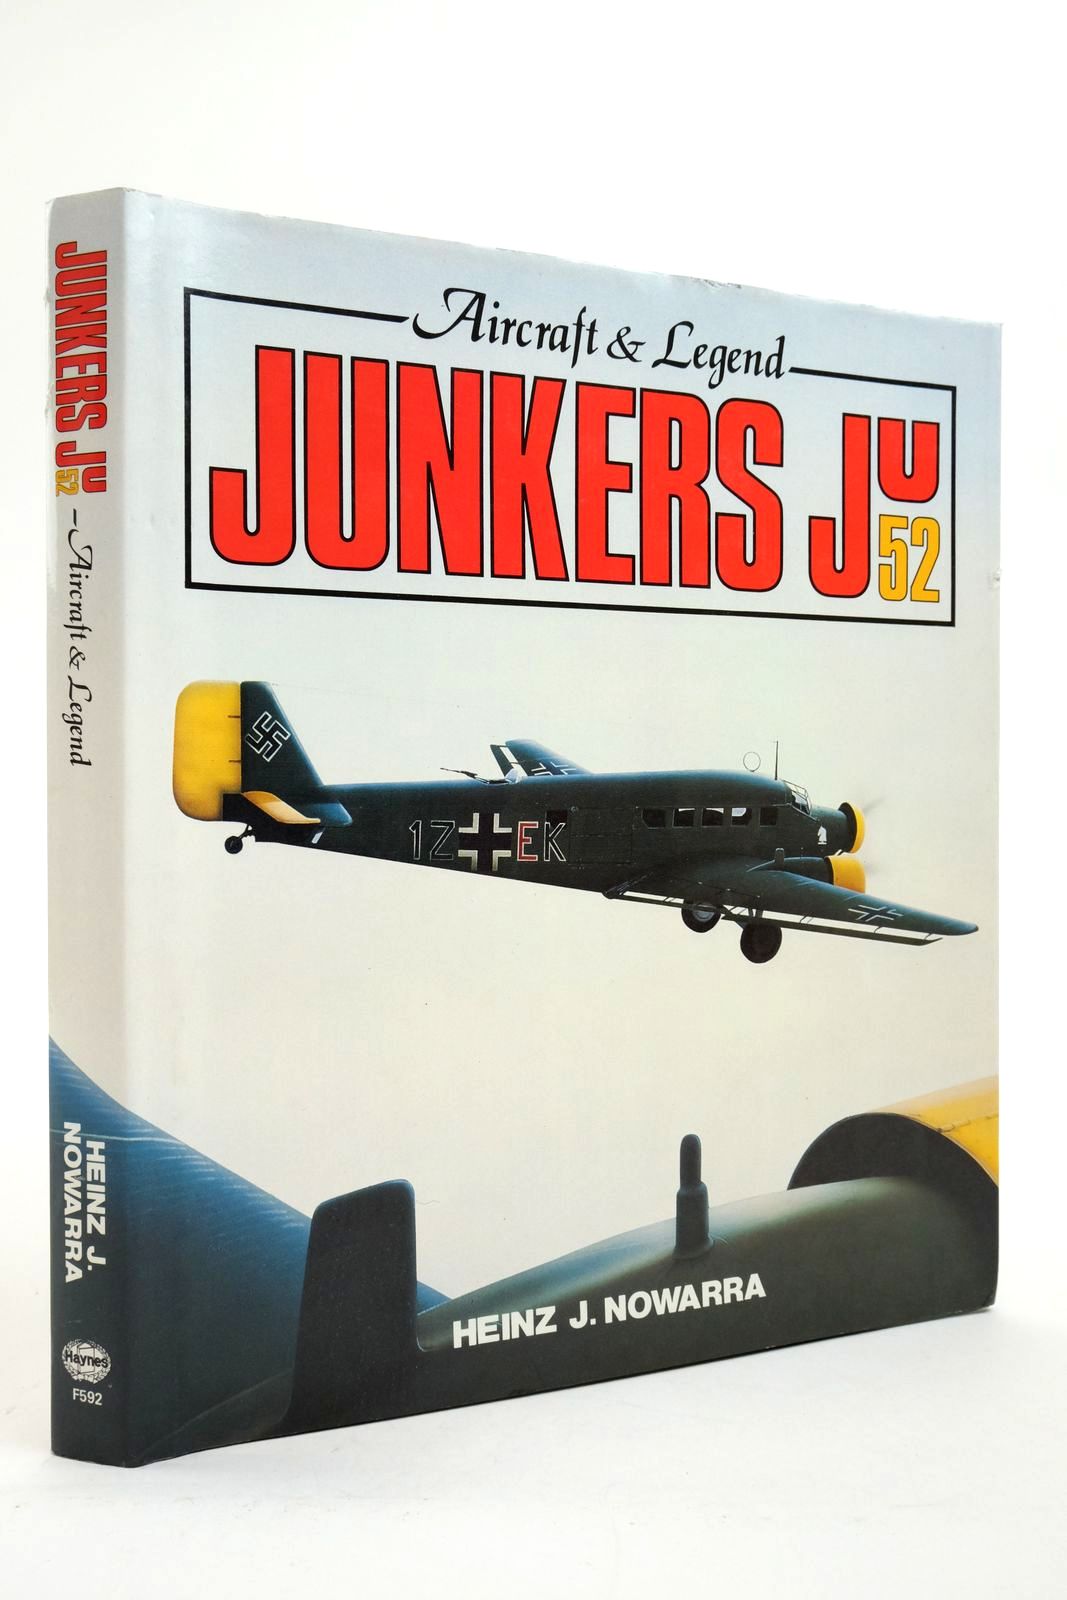 Photo of JUNKERS JU 52 AIRCRAFT &AMP; LEGEND written by Nowarra, Heinz J. published by Foulis, Haynes (STOCK CODE: 2138722)  for sale by Stella & Rose's Books